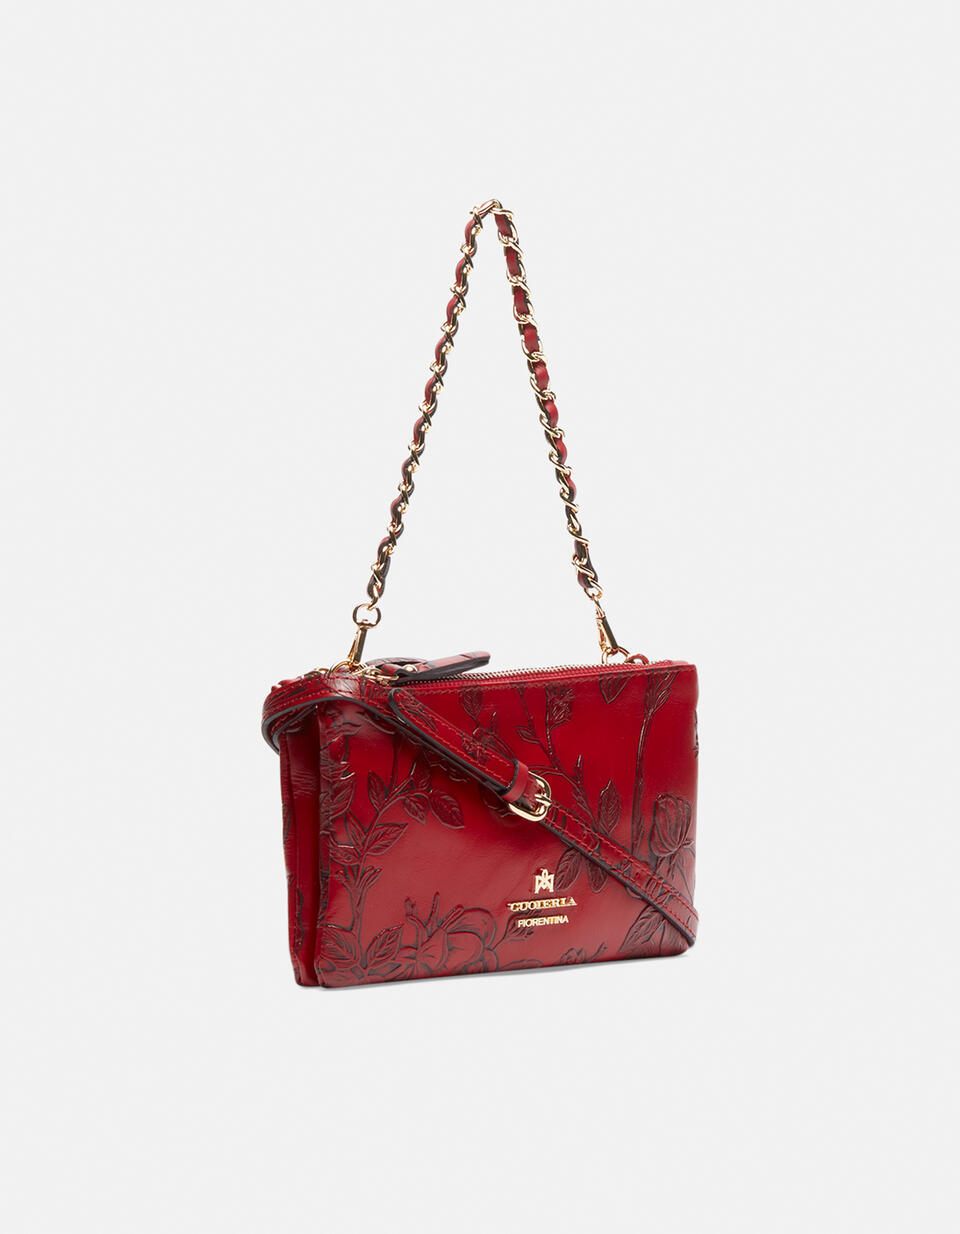 Double clutch bag in rose embossed printed leather - Crossbody Bags - WOMEN'S BAGS | bags Mimì ROSSO - Crossbody Bags - WOMEN'S BAGS | bagsCuoieria Fiorentina